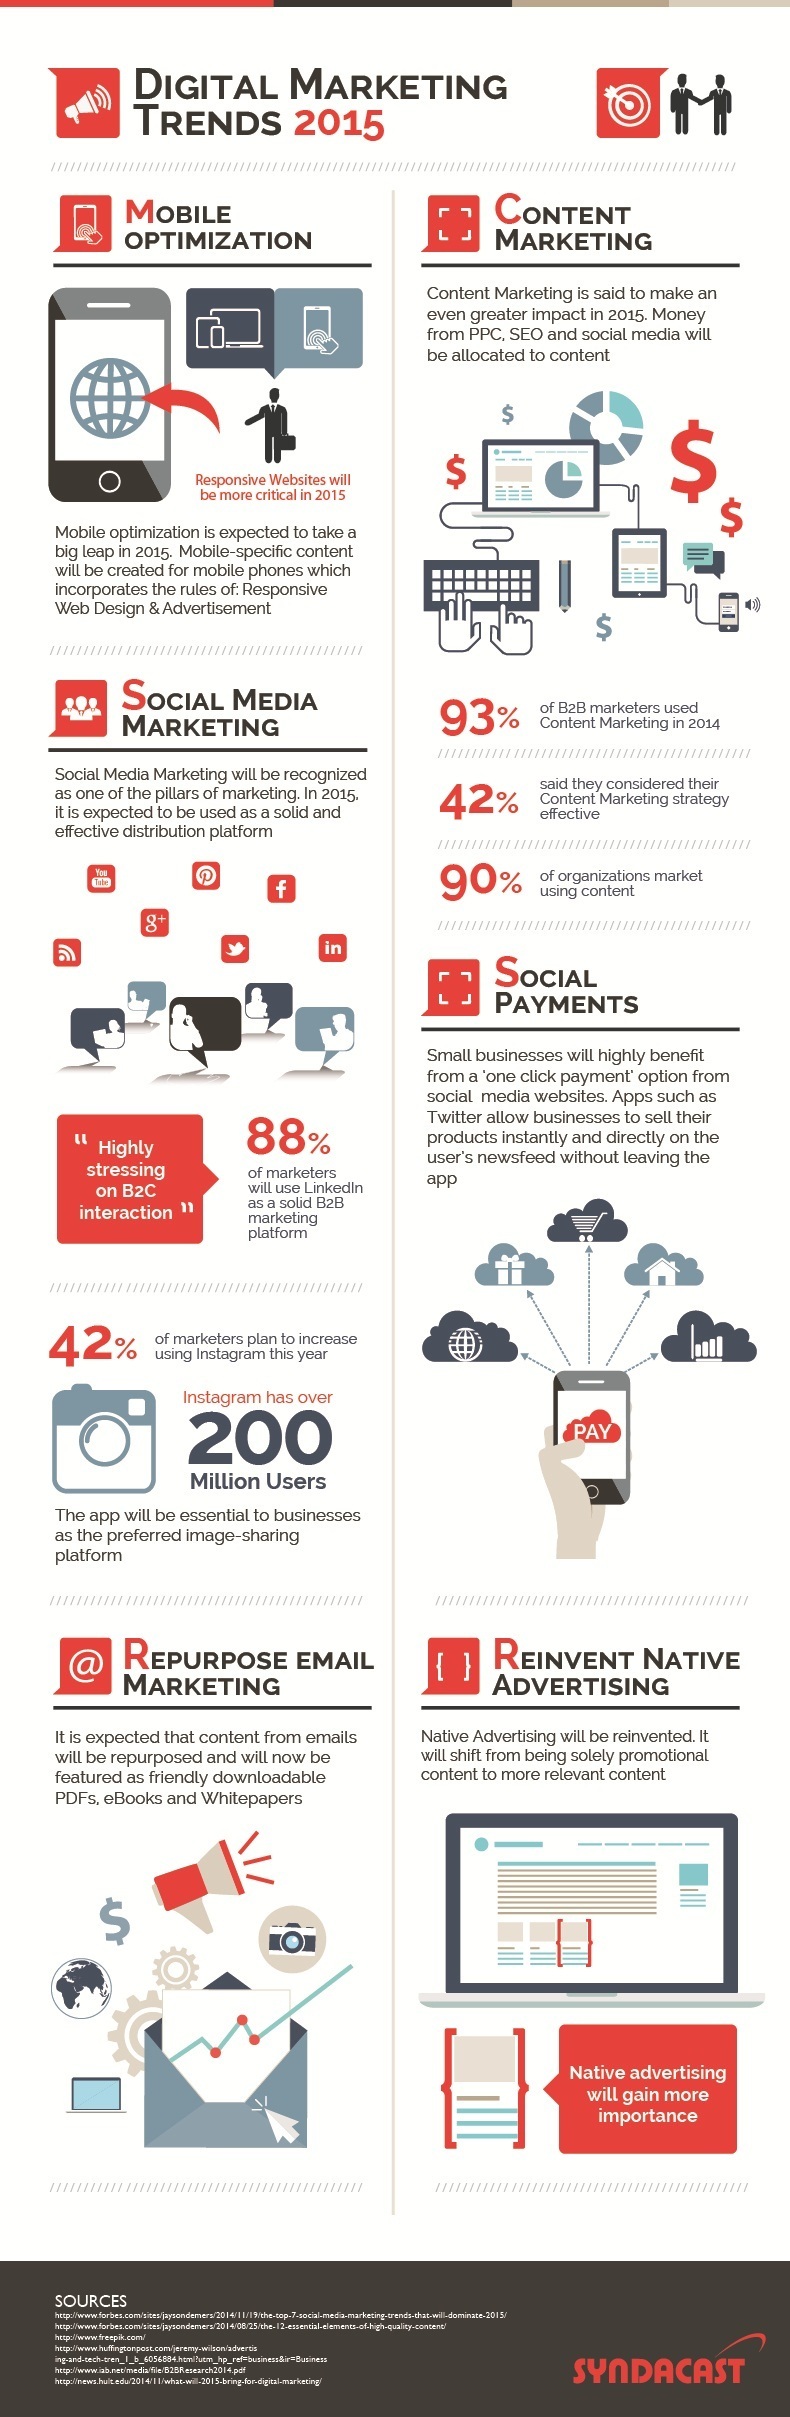 Mobile, Social, Content, Email: Digital Marketing Trends And Prediction 2015 – #infographic